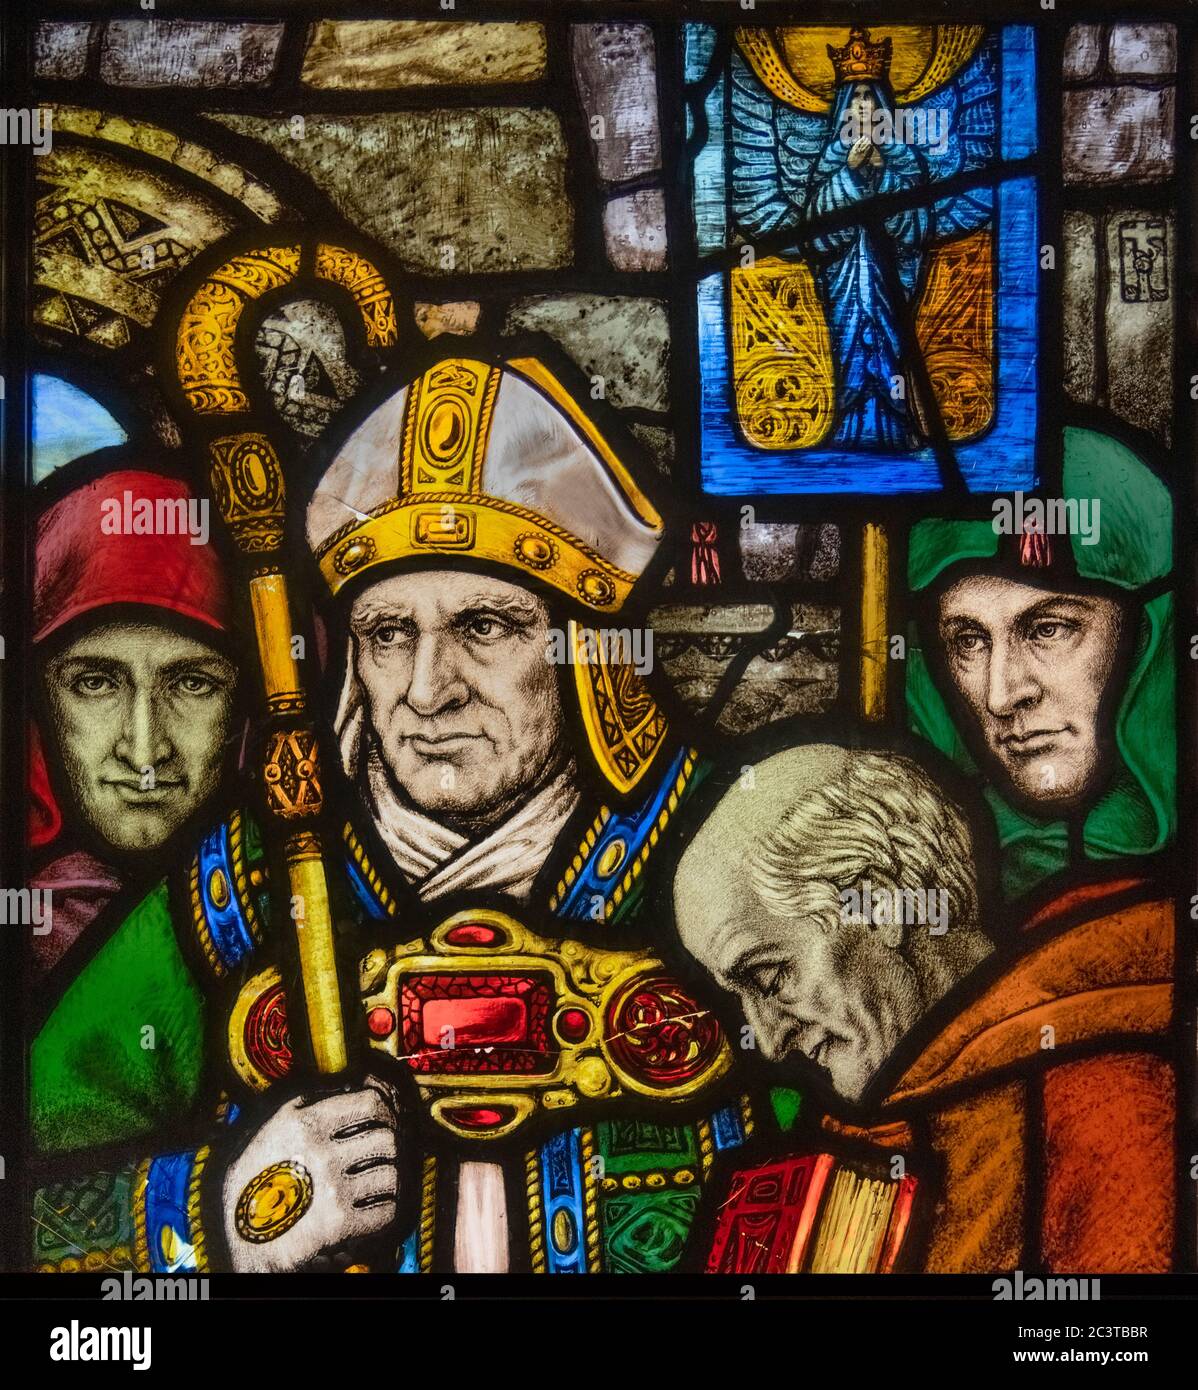 Ireland, County Cork, Cork City, Crawford Art Gallery, Stained glass window by Harry Clarke depicting the consecration of Saint Mel as Bishop of Longford by Saint Patrick. Stock Photo